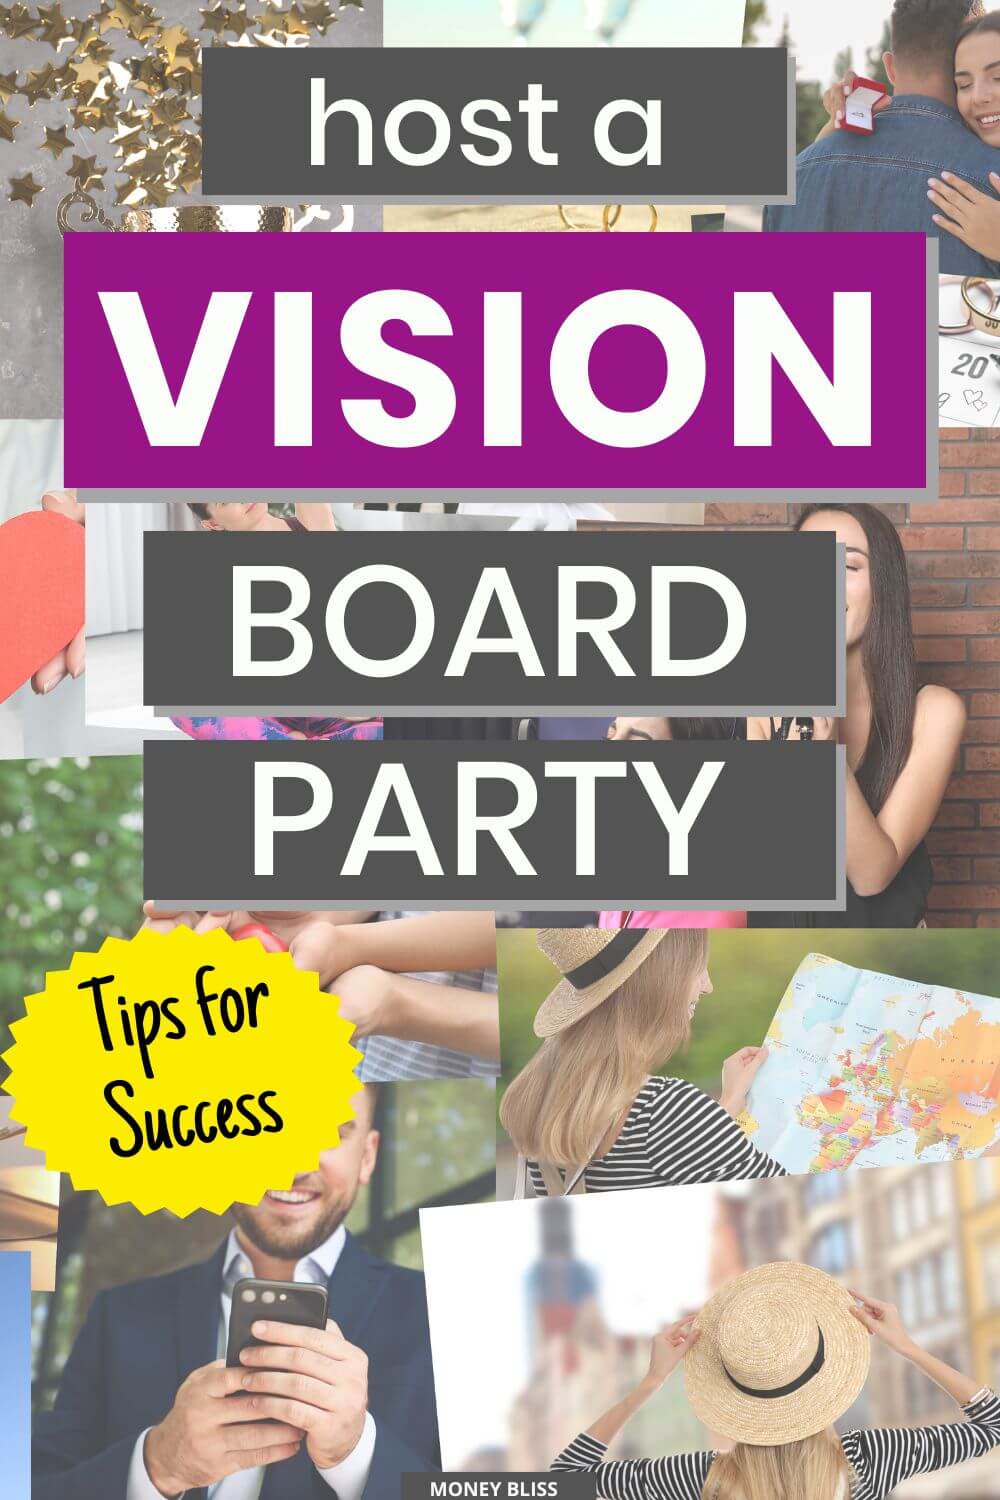 Host A Vision Board Party Plenty Of Ideas For Success 23 Money Bliss